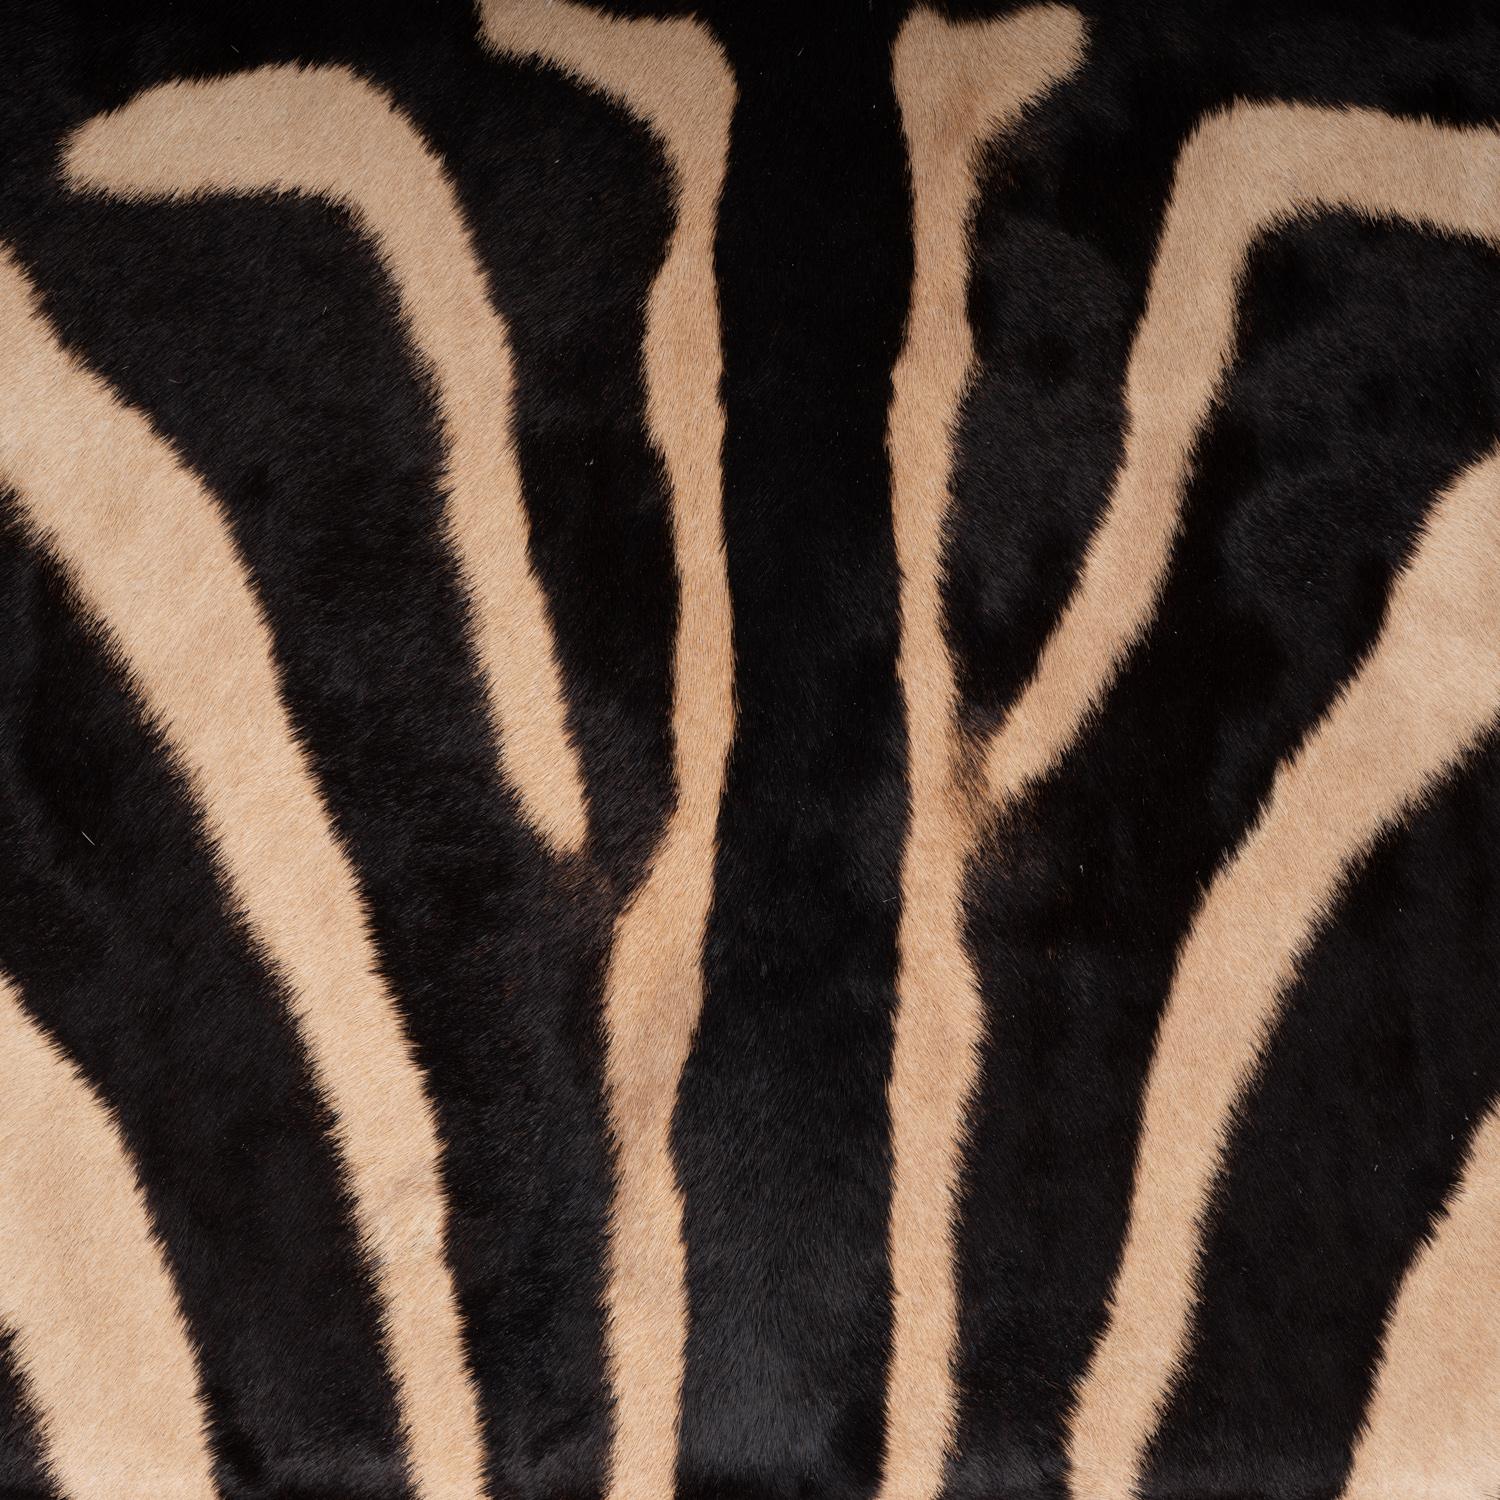 South African Bench - Zebra Hide  For Sale